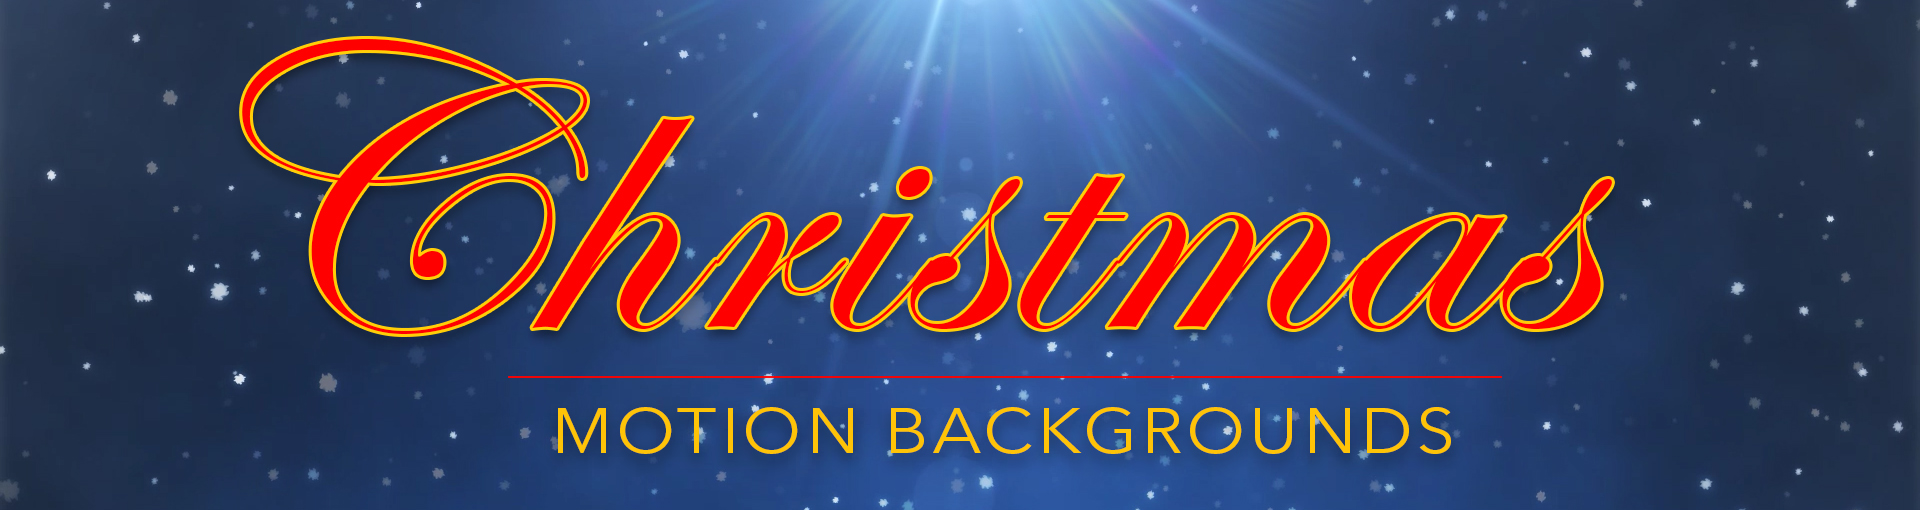 ChritmasMotionBackgrounds | 1000+ Royalty Free Motion Backgrounds and ...